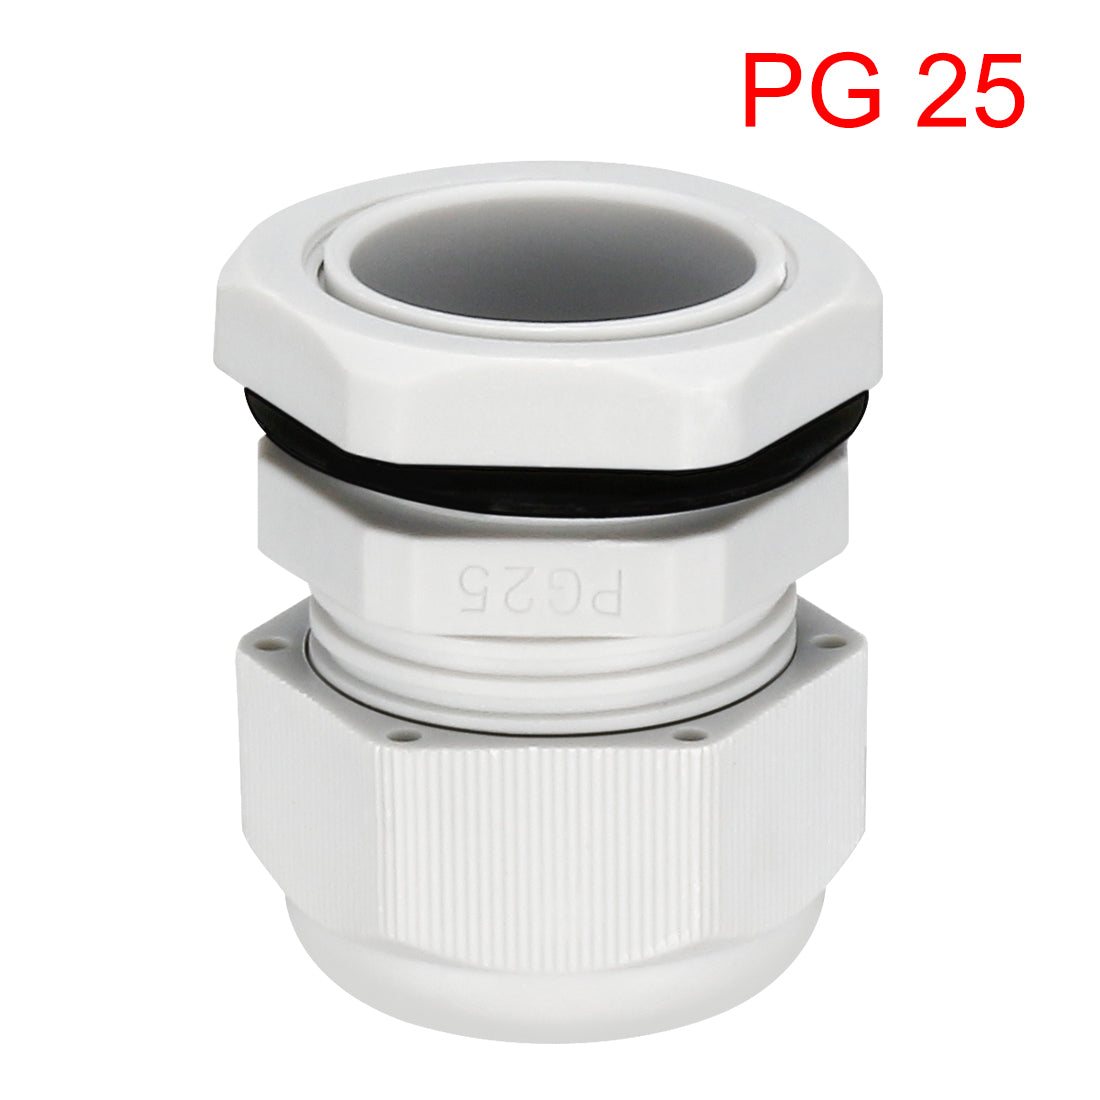 uxcell Uxcell 5Pcs PG25 Cable Gland Waterproof Plastic Joint Adjustable Locknut White for 16mm-21mm Dia Cable Wire